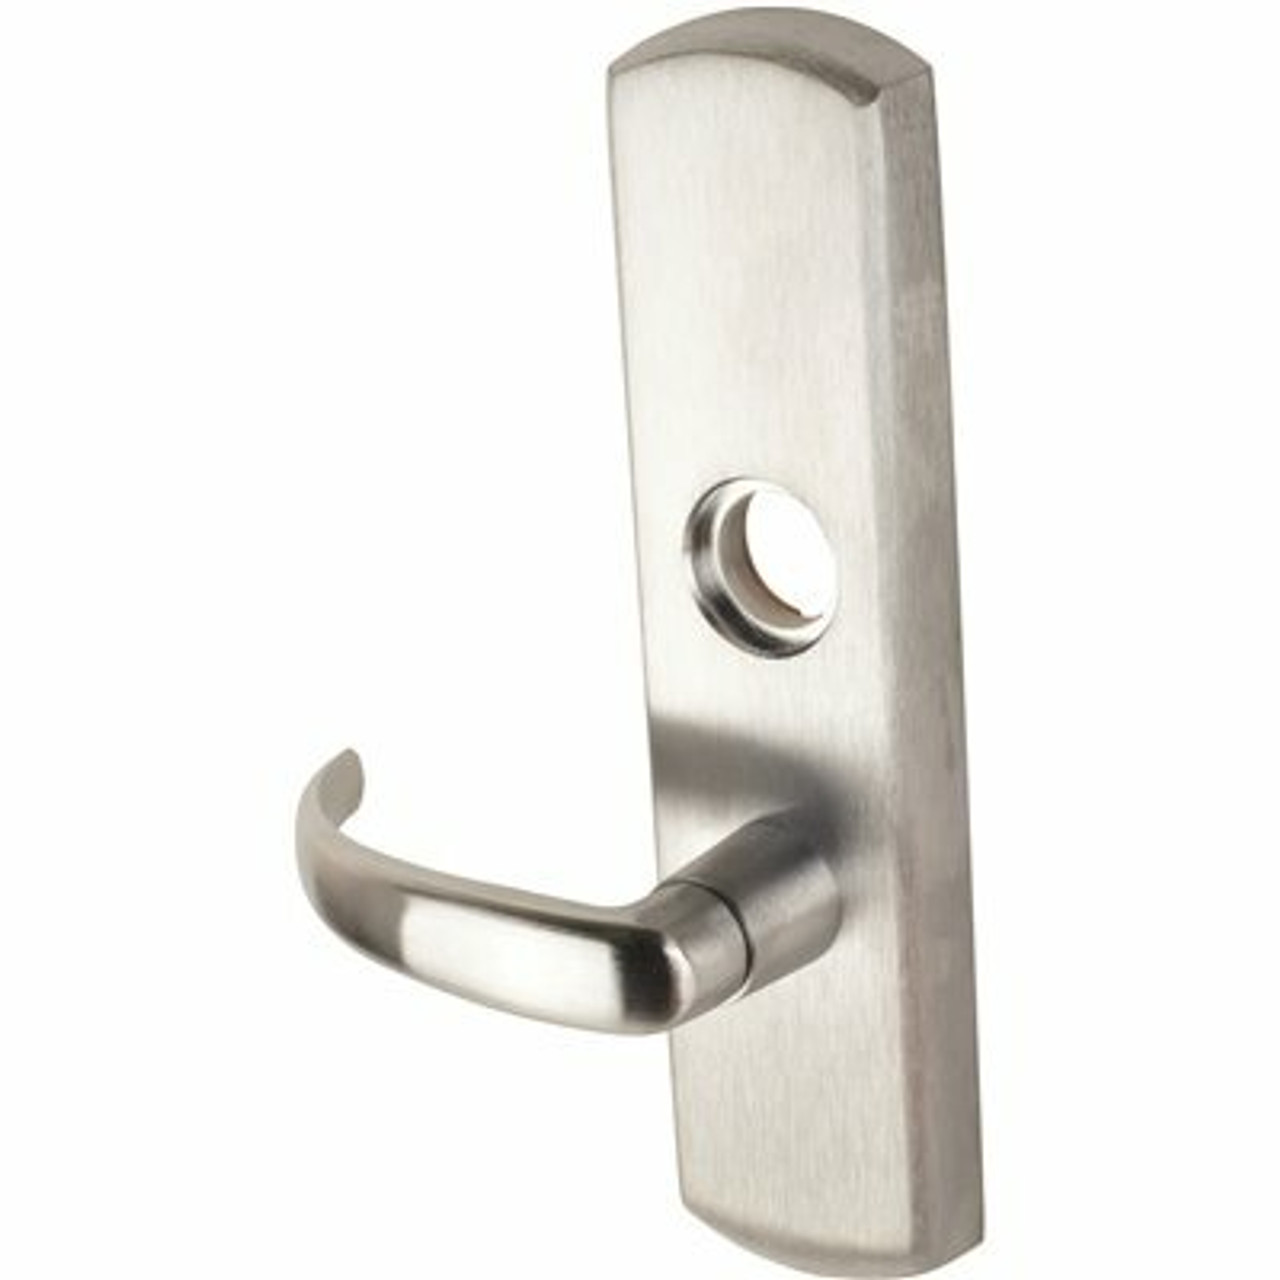 Von Duprin Grade-1 Satin Chrome Exit Device Trim Only, Classroom Function With 17 Lever, Left Hand Reverse - 310013213